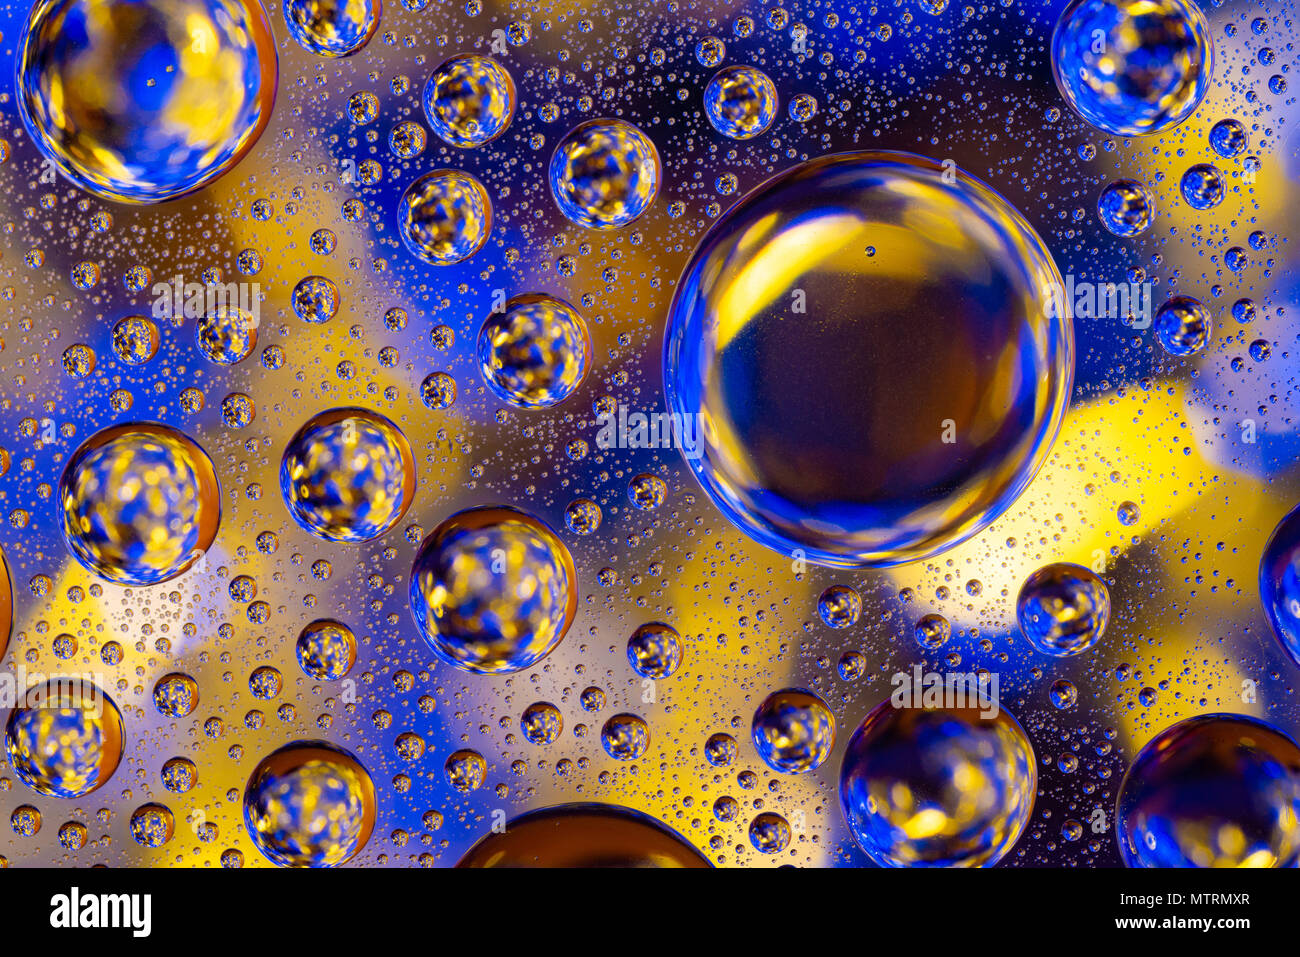 Water drops on glass with a yellow and gold lighted background Stock Photo